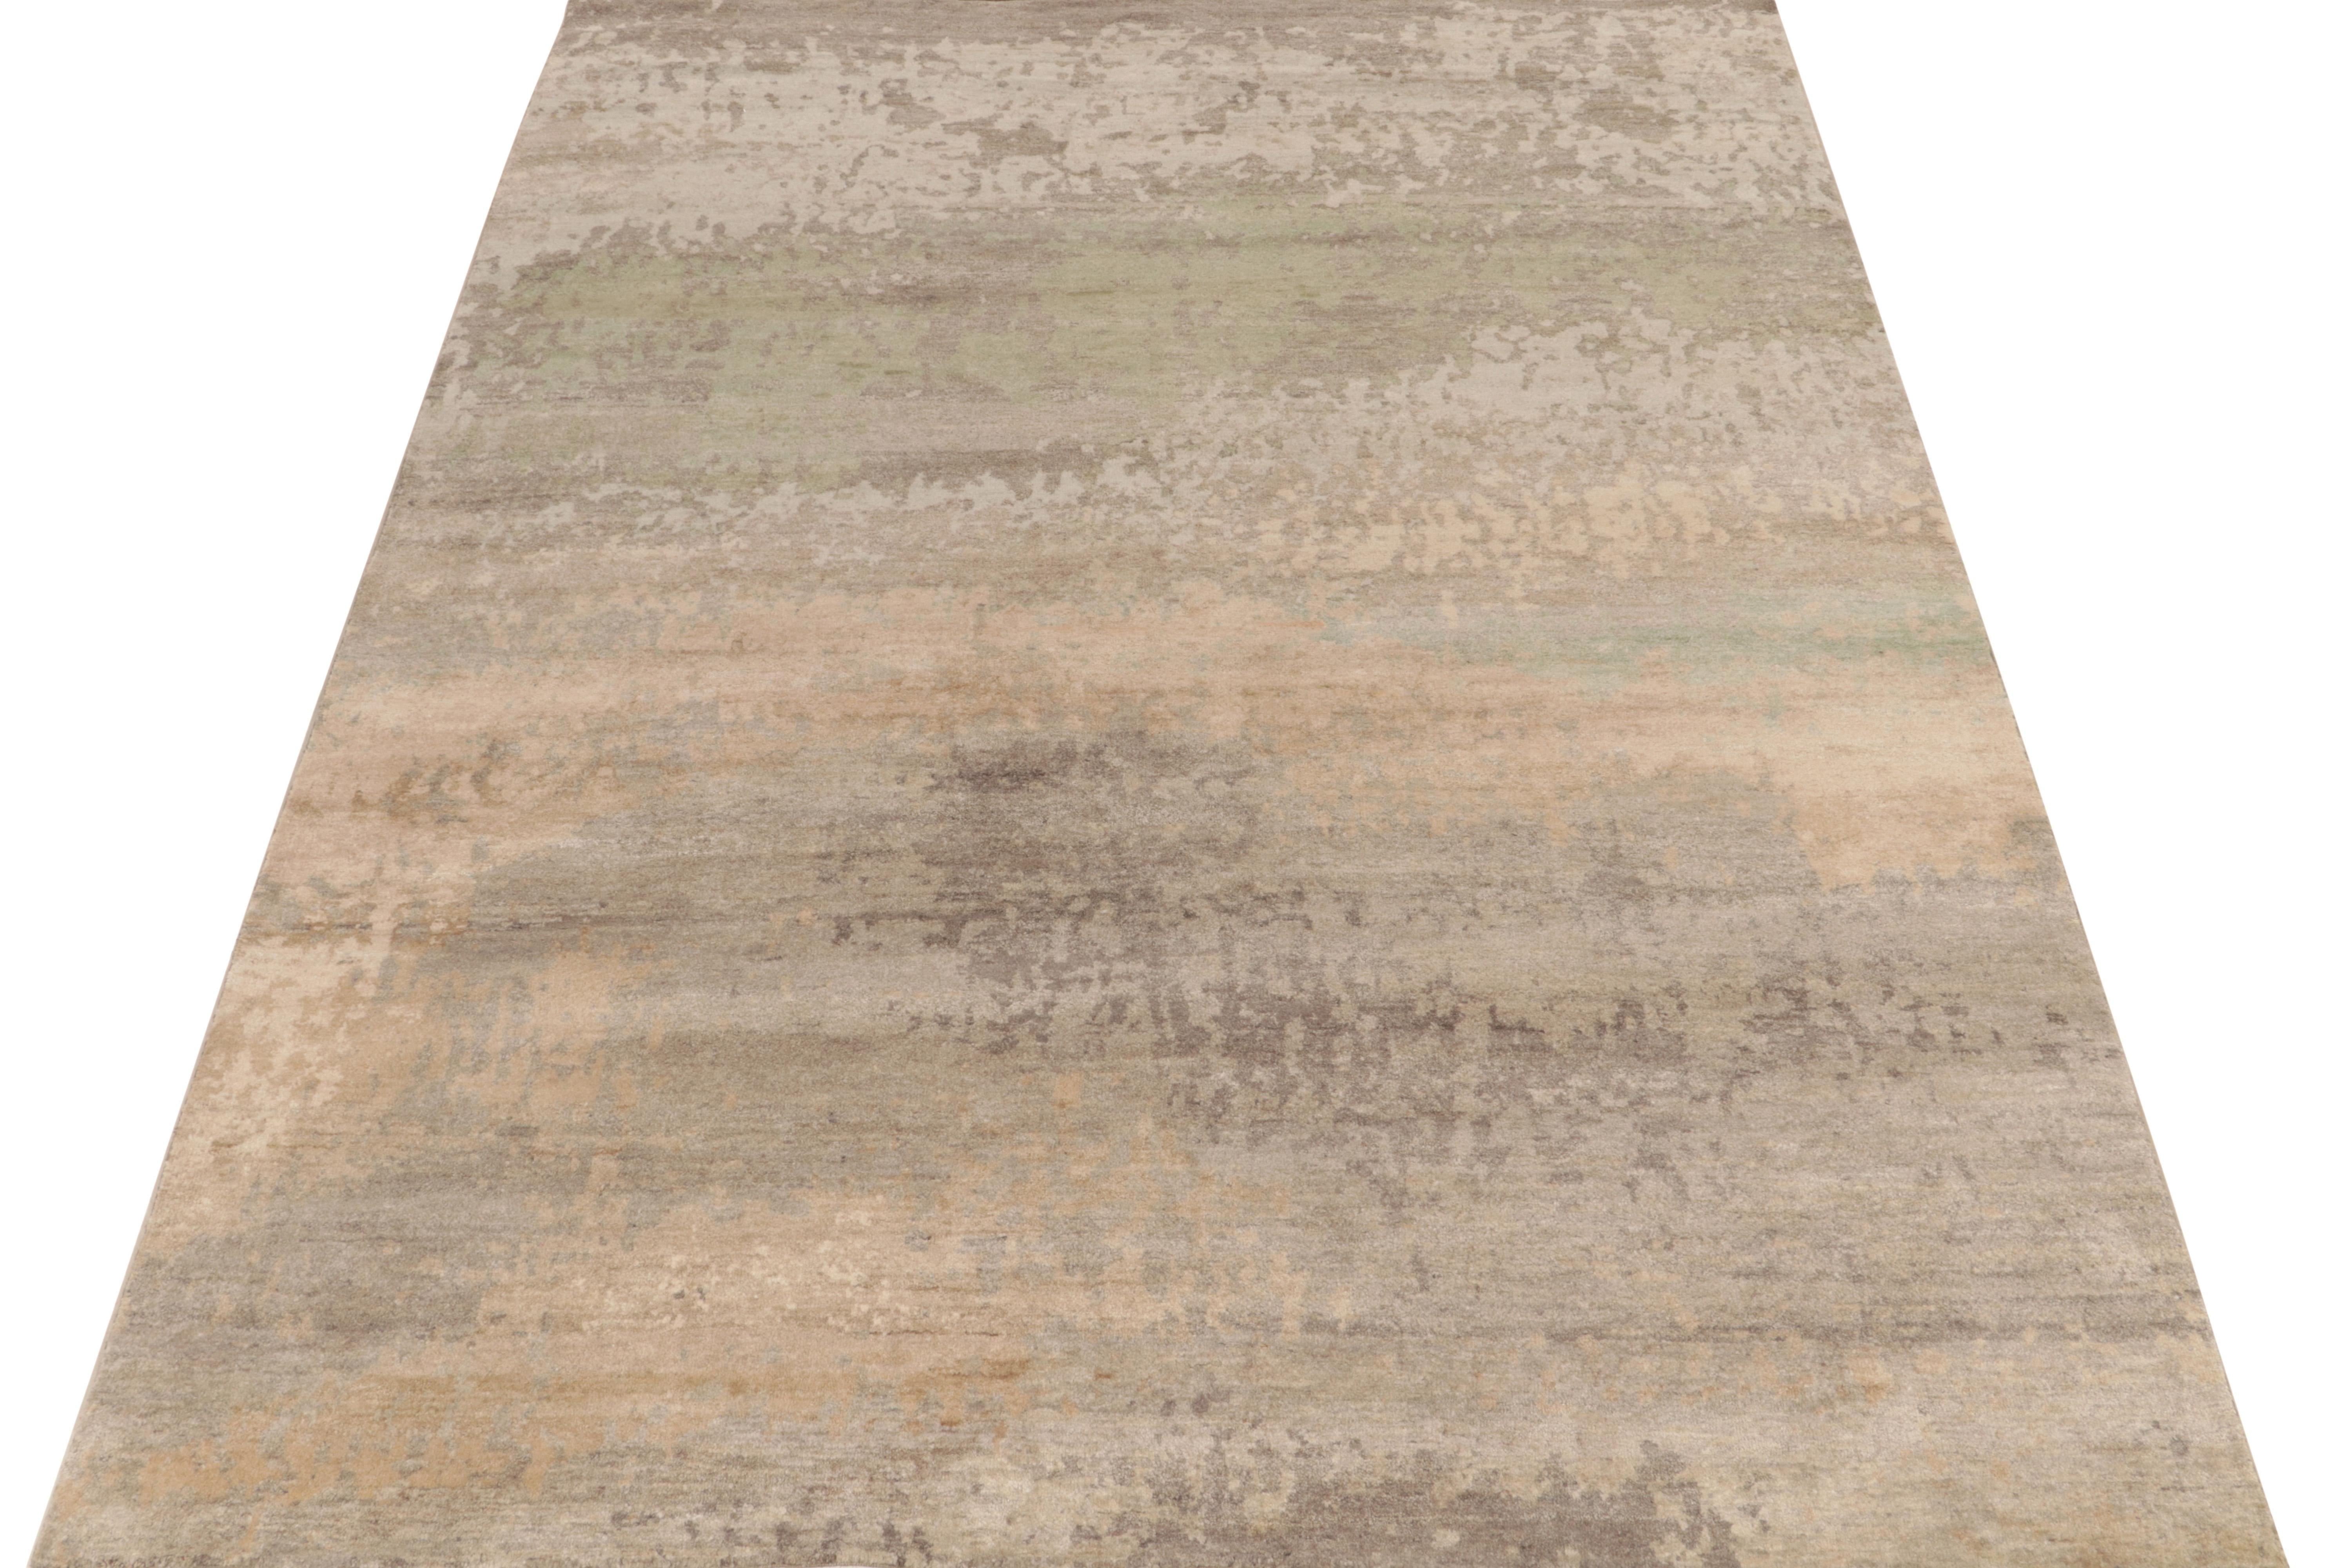 Hand-knotted in fabulous all-natural silk, a glorious 7x10 piece from Rug & Kilim’s modern selections. The contemporary area rug bears gorgeous painterly attitude in polychromatic tones of gray, beige & green joyfully blended in abstract